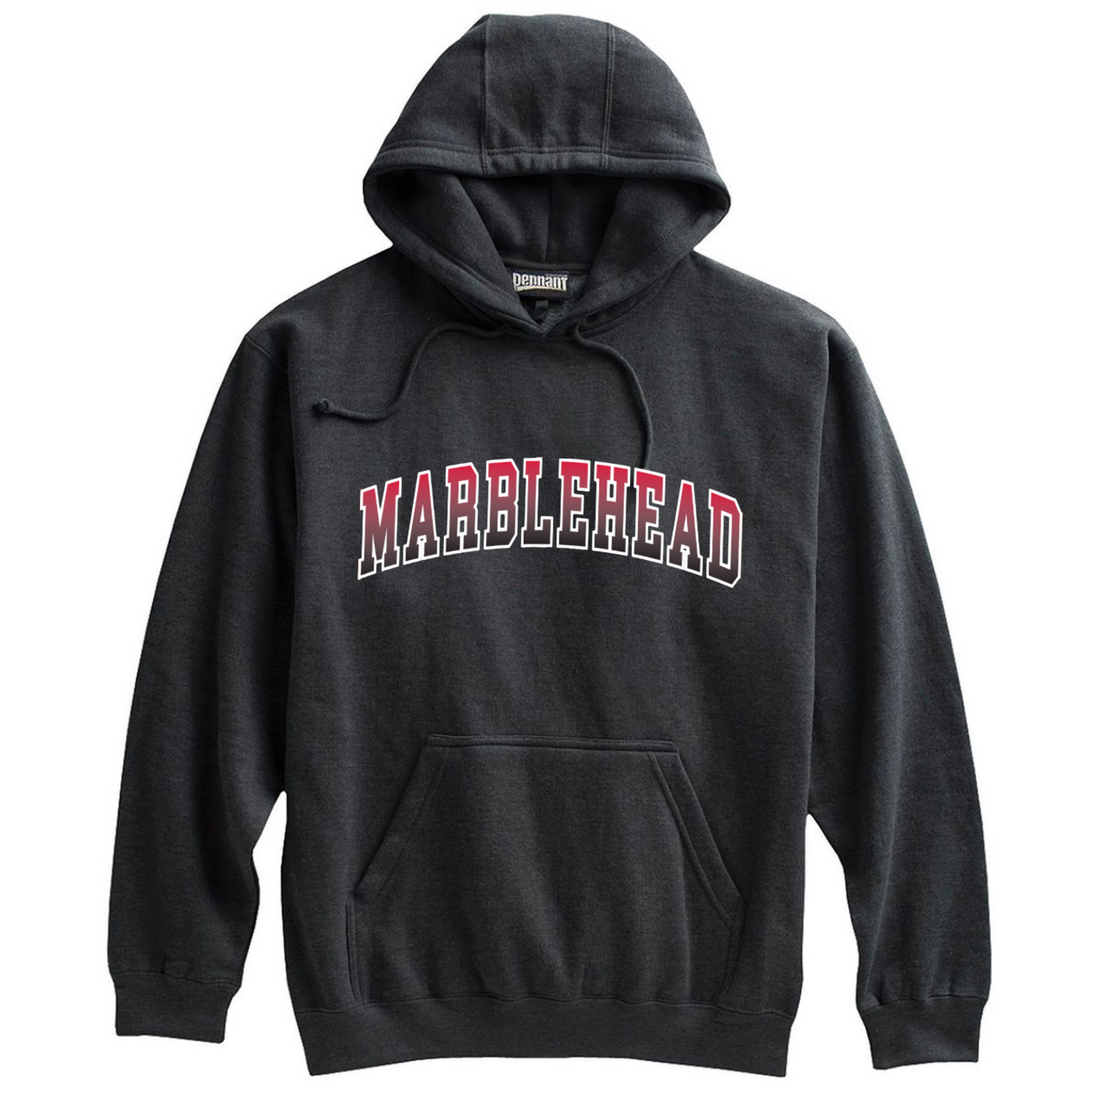 Marblehead Ombre Arch Hoodie